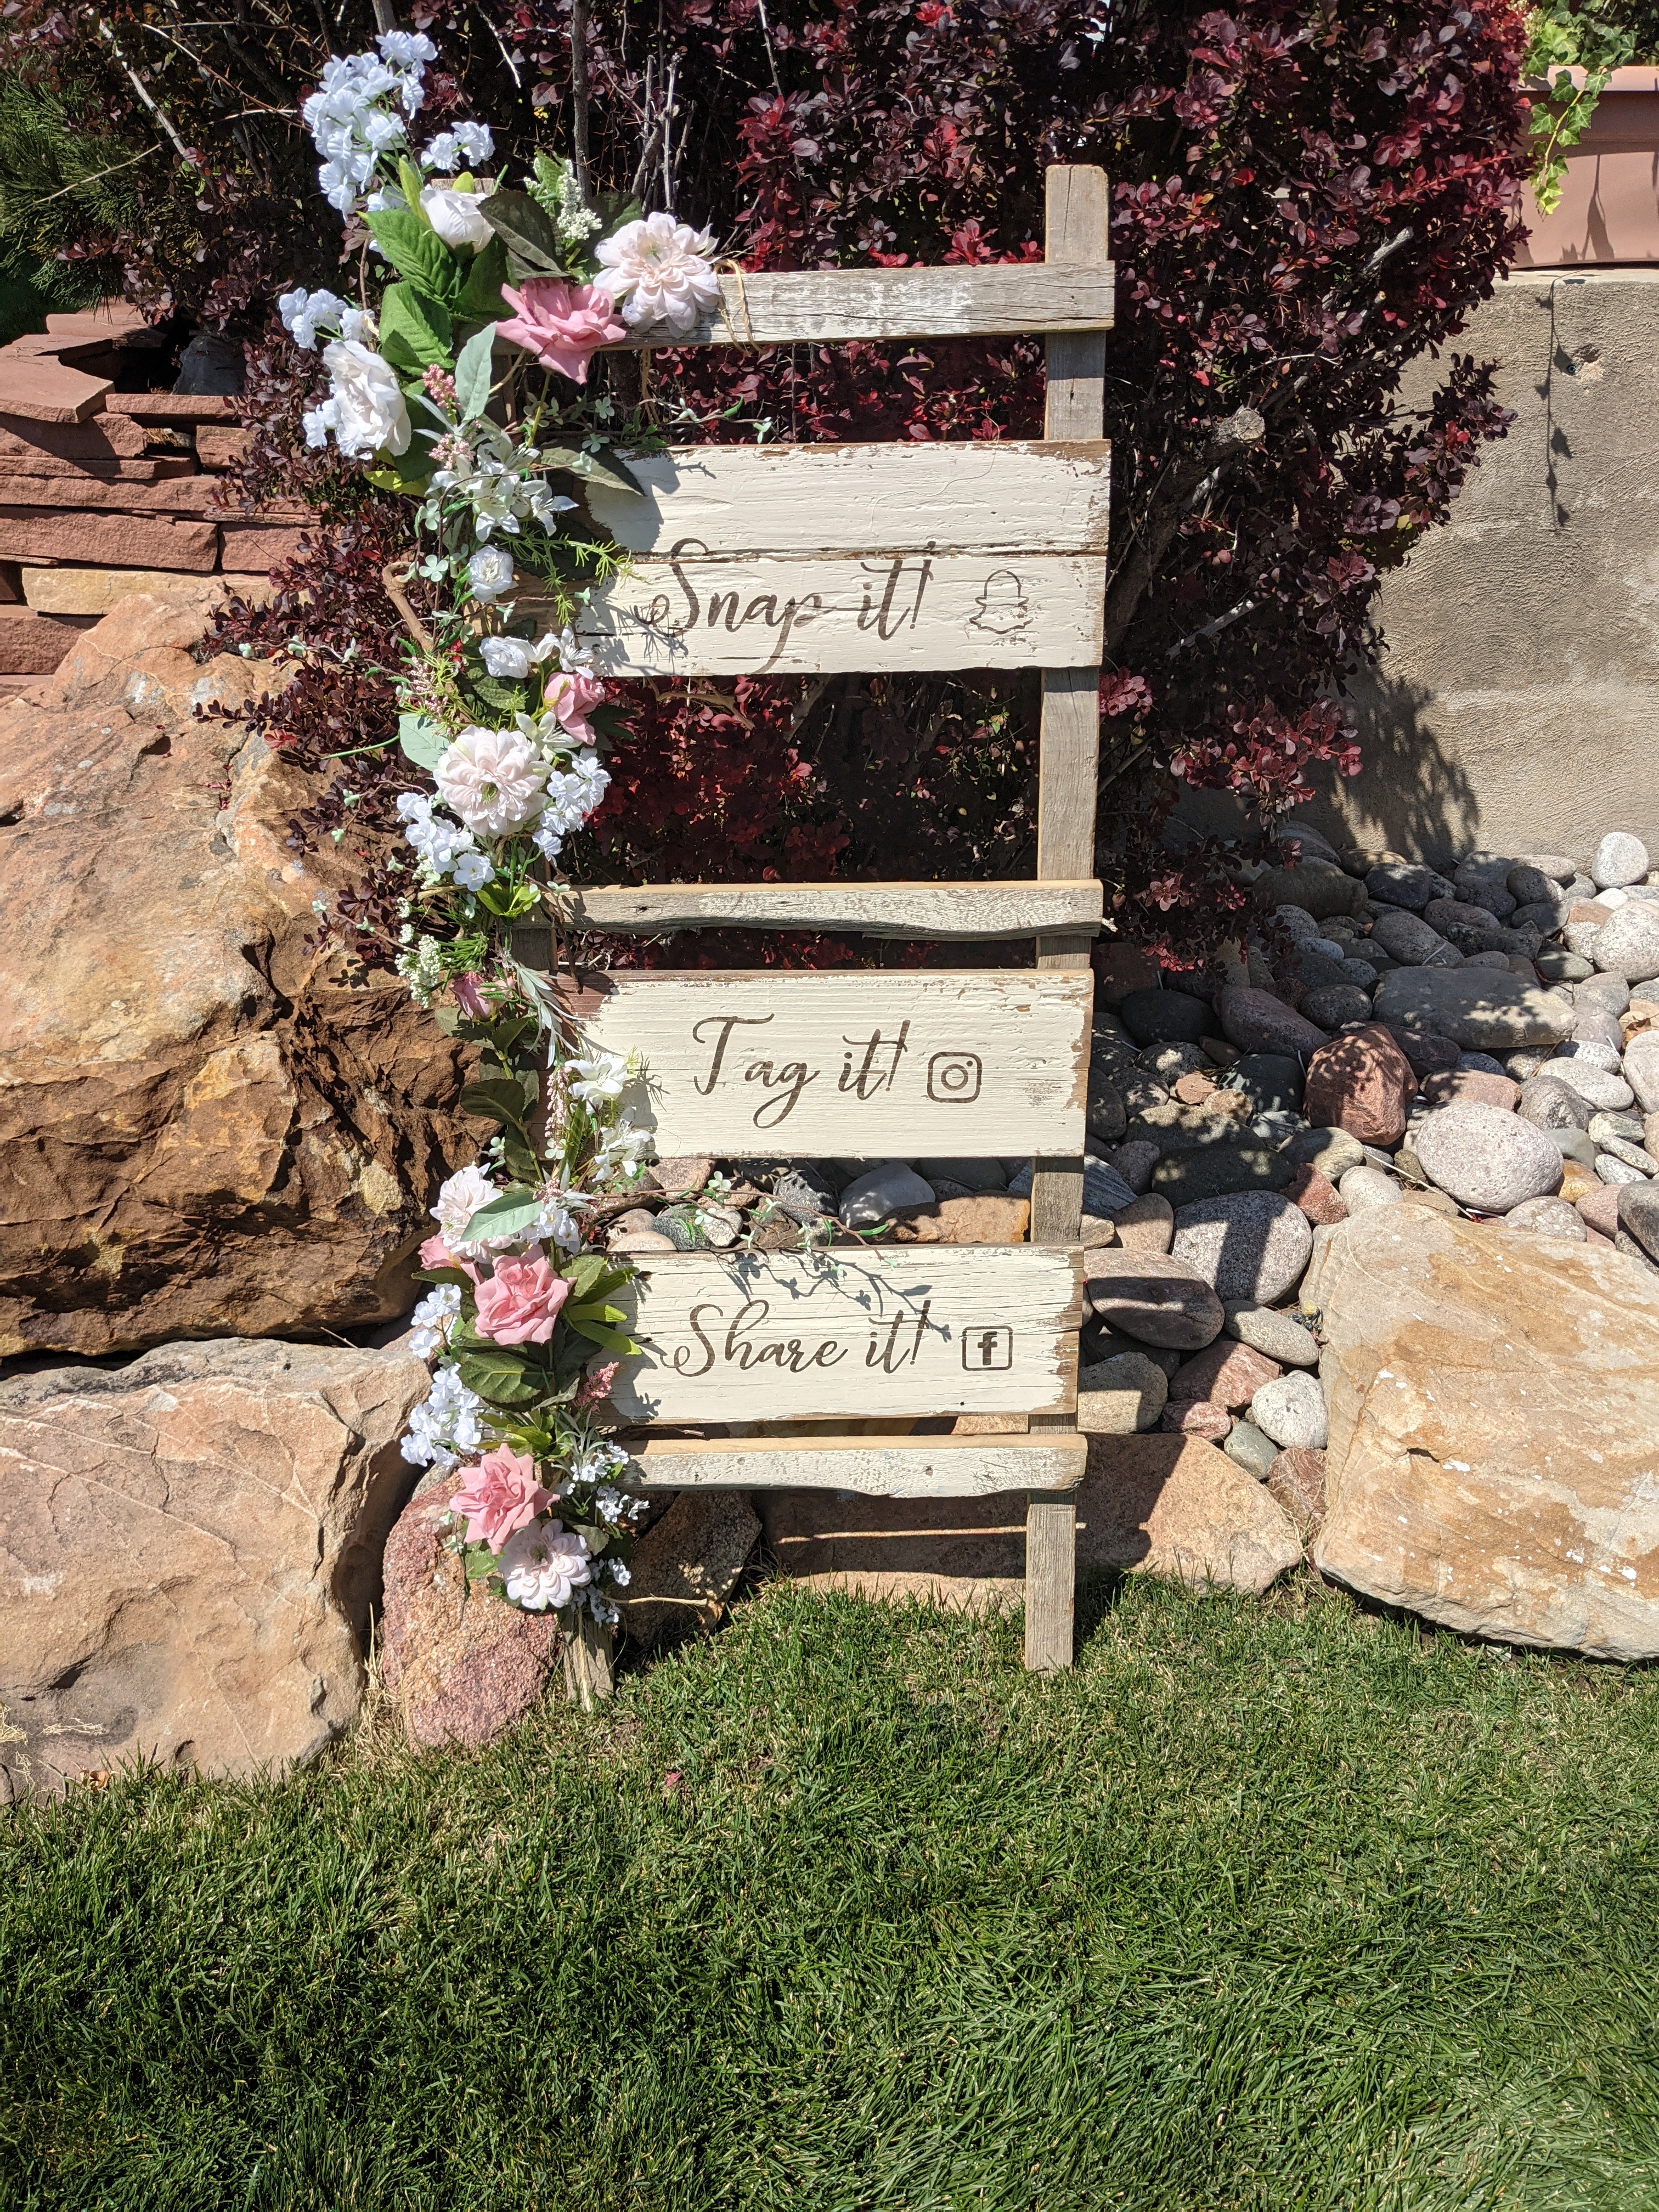 
Ceremony Sign, Snap It, Tag It & Share It Sign - Rental